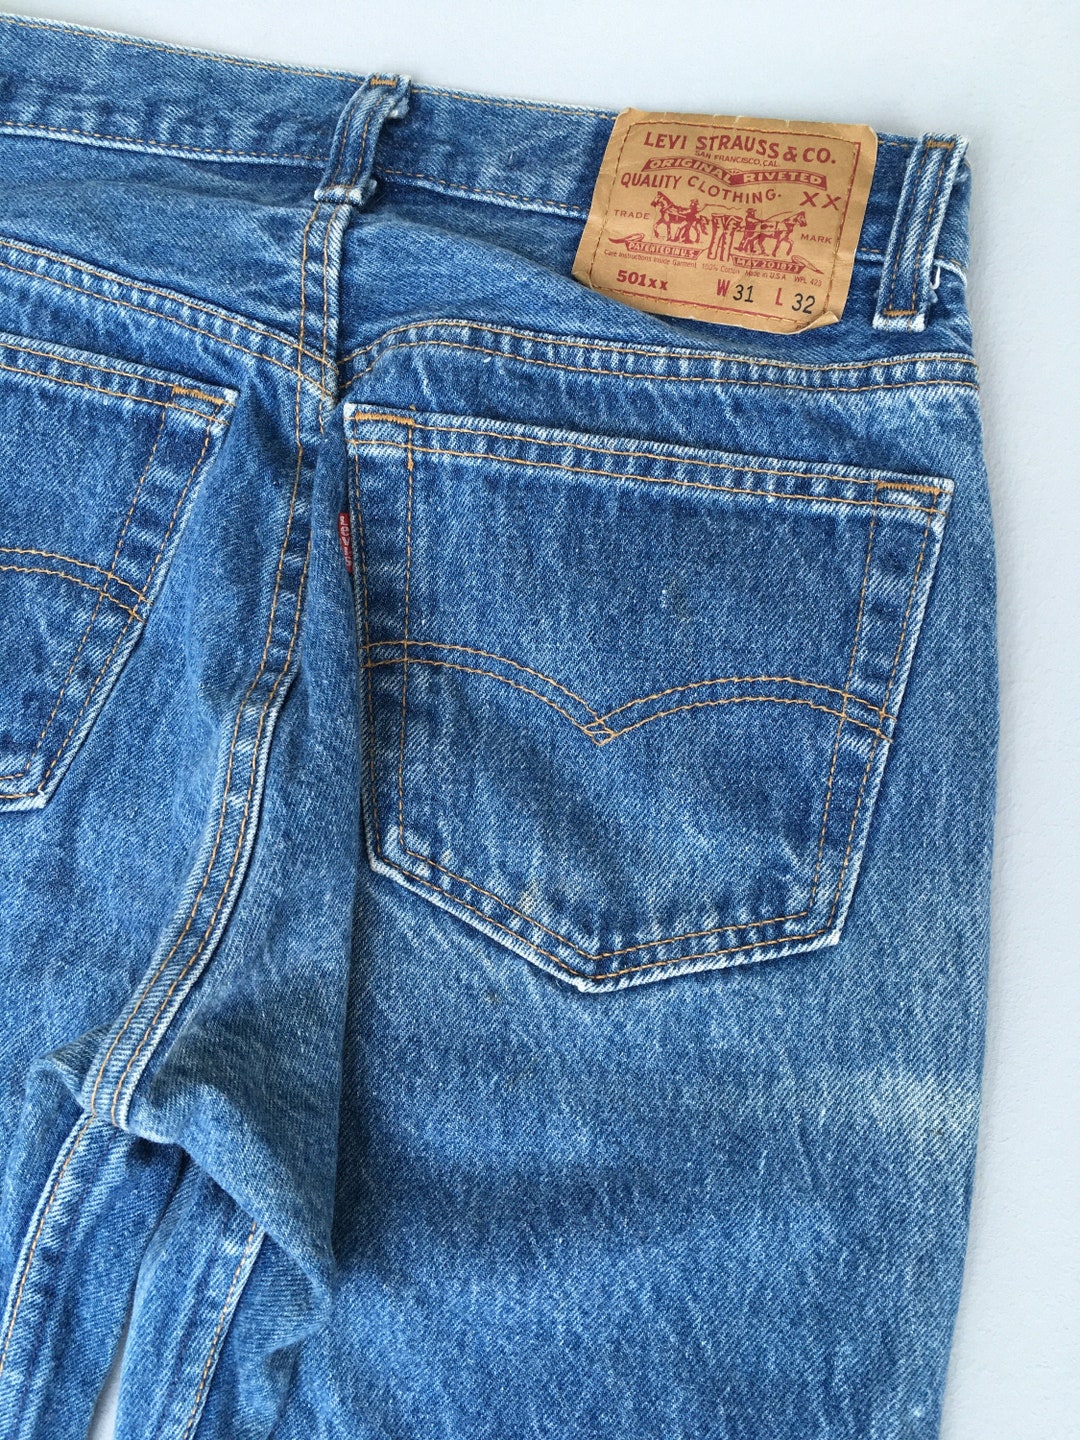 Size 27 Vintage Levis 501XX Women's Jeans High Waisted 90s 